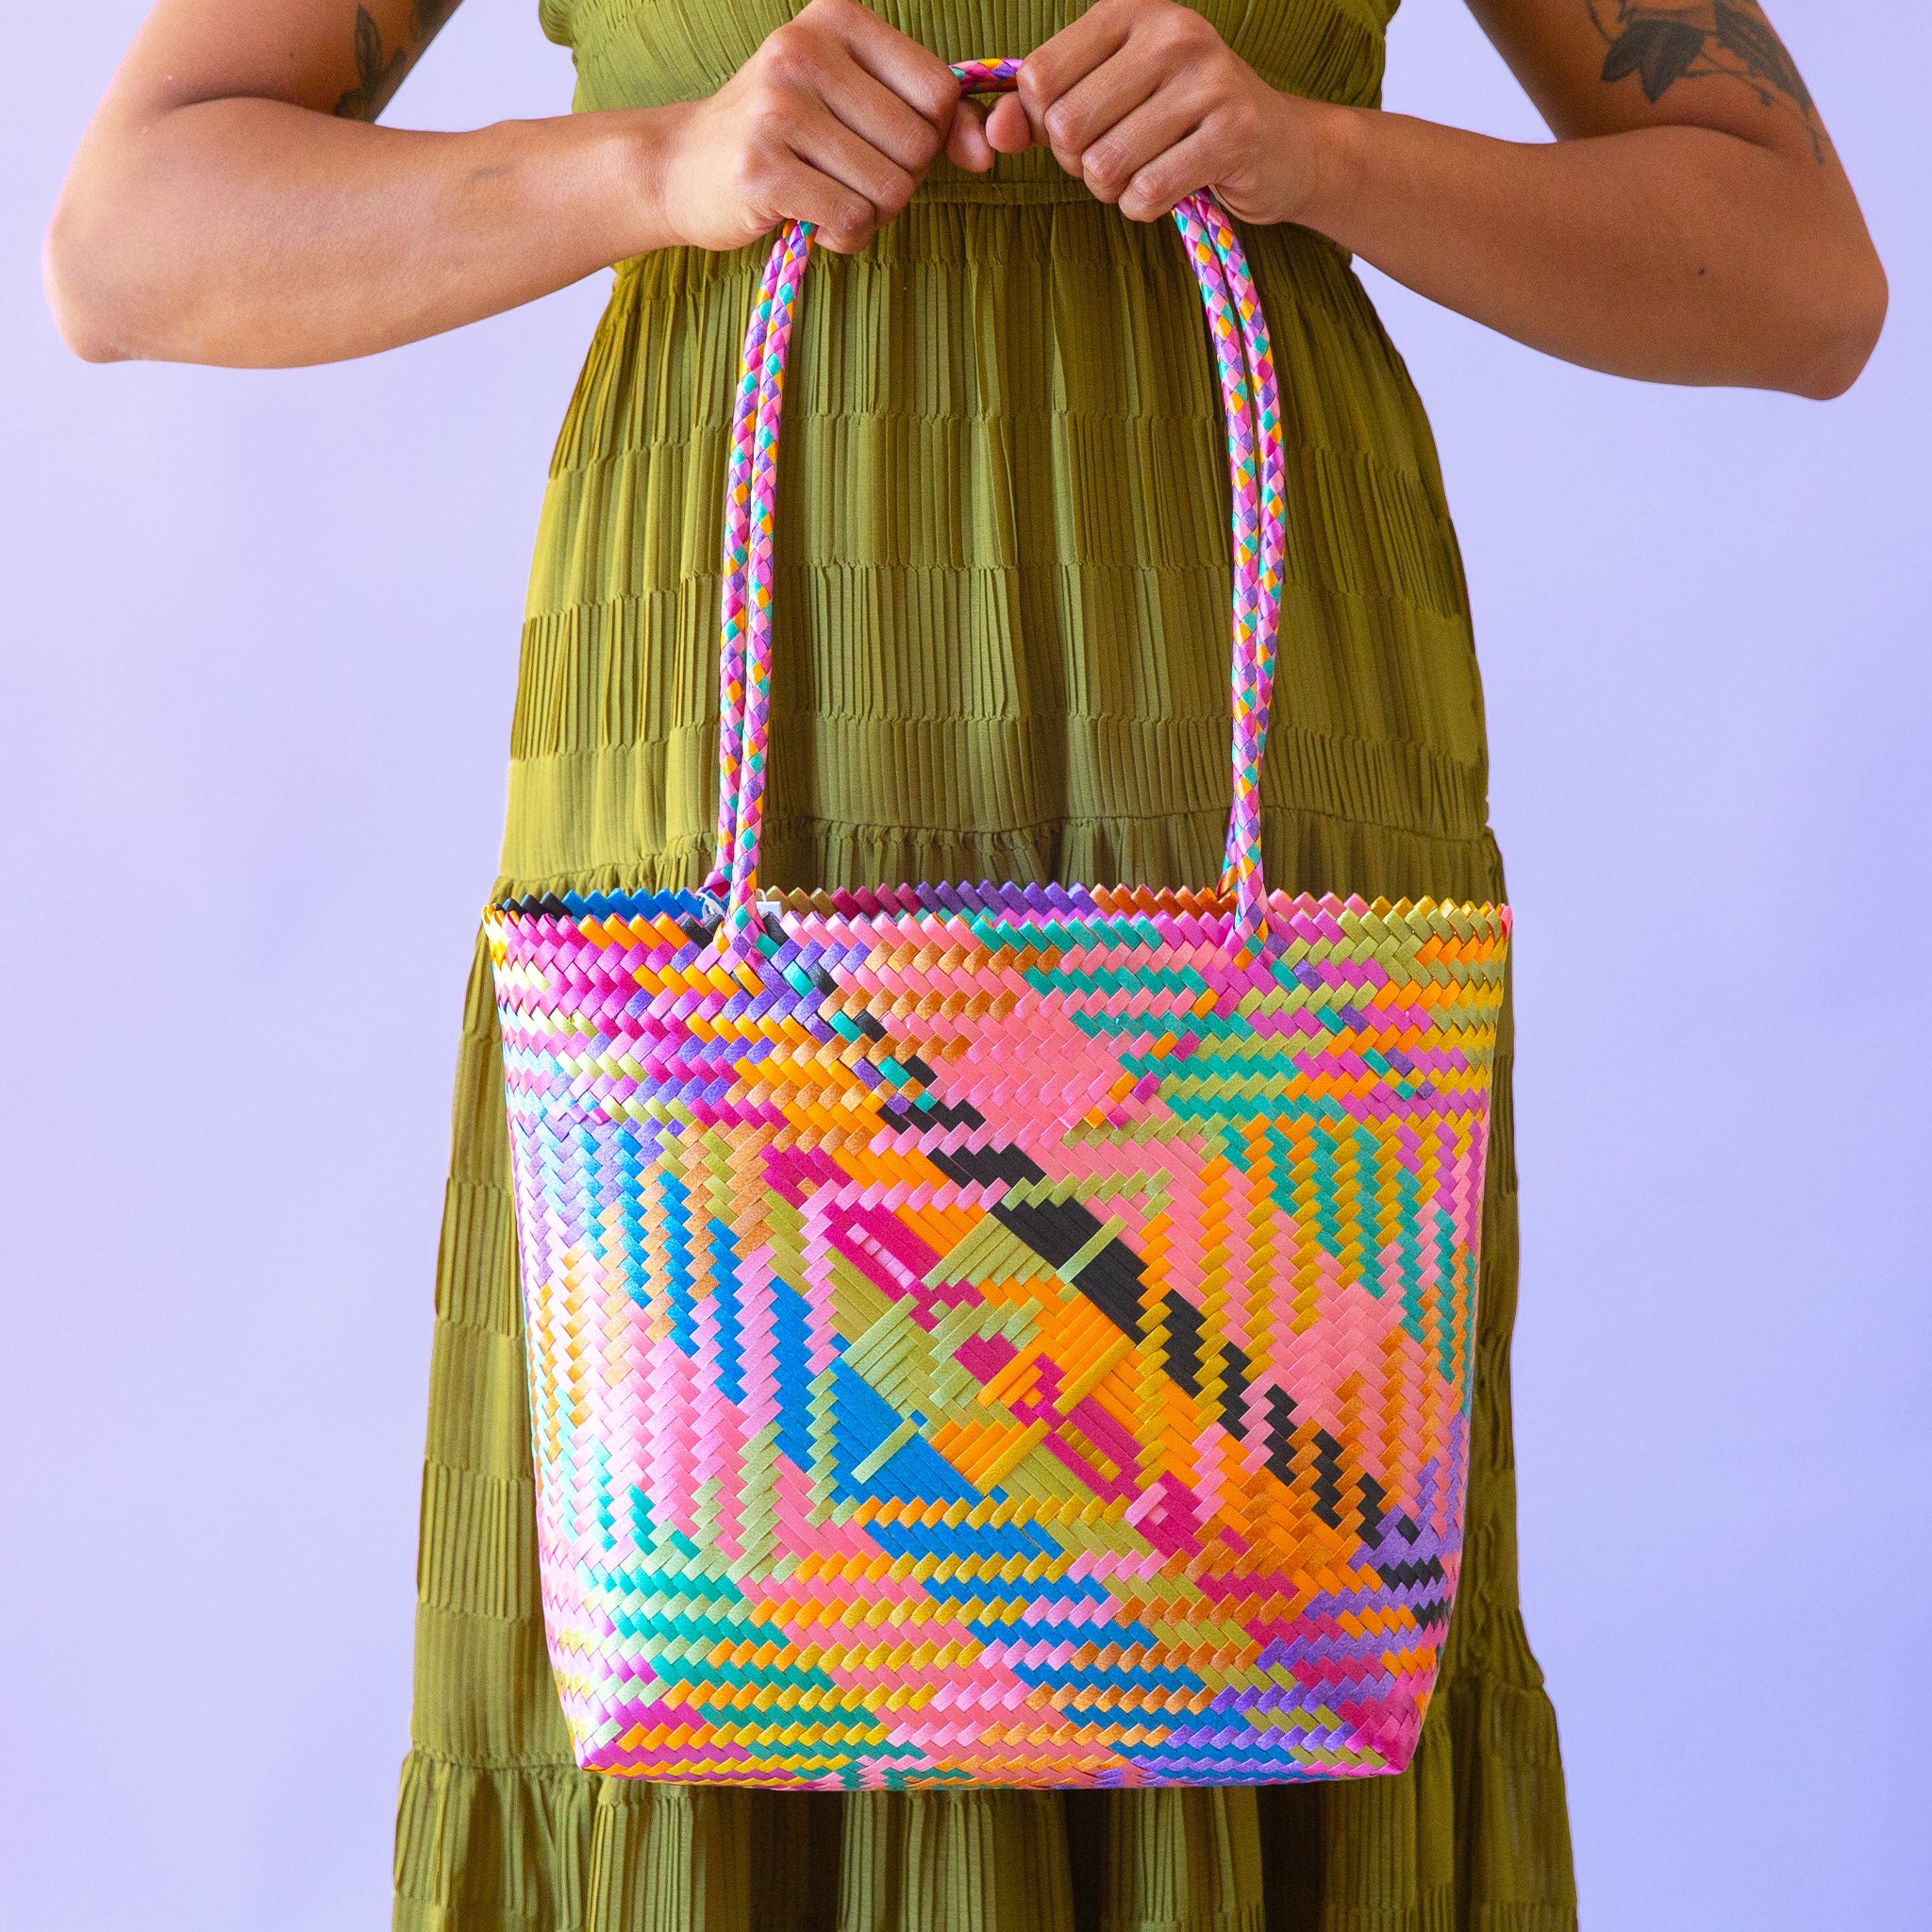 A model holding a mutli colored woven handbag with shoulder straps. 